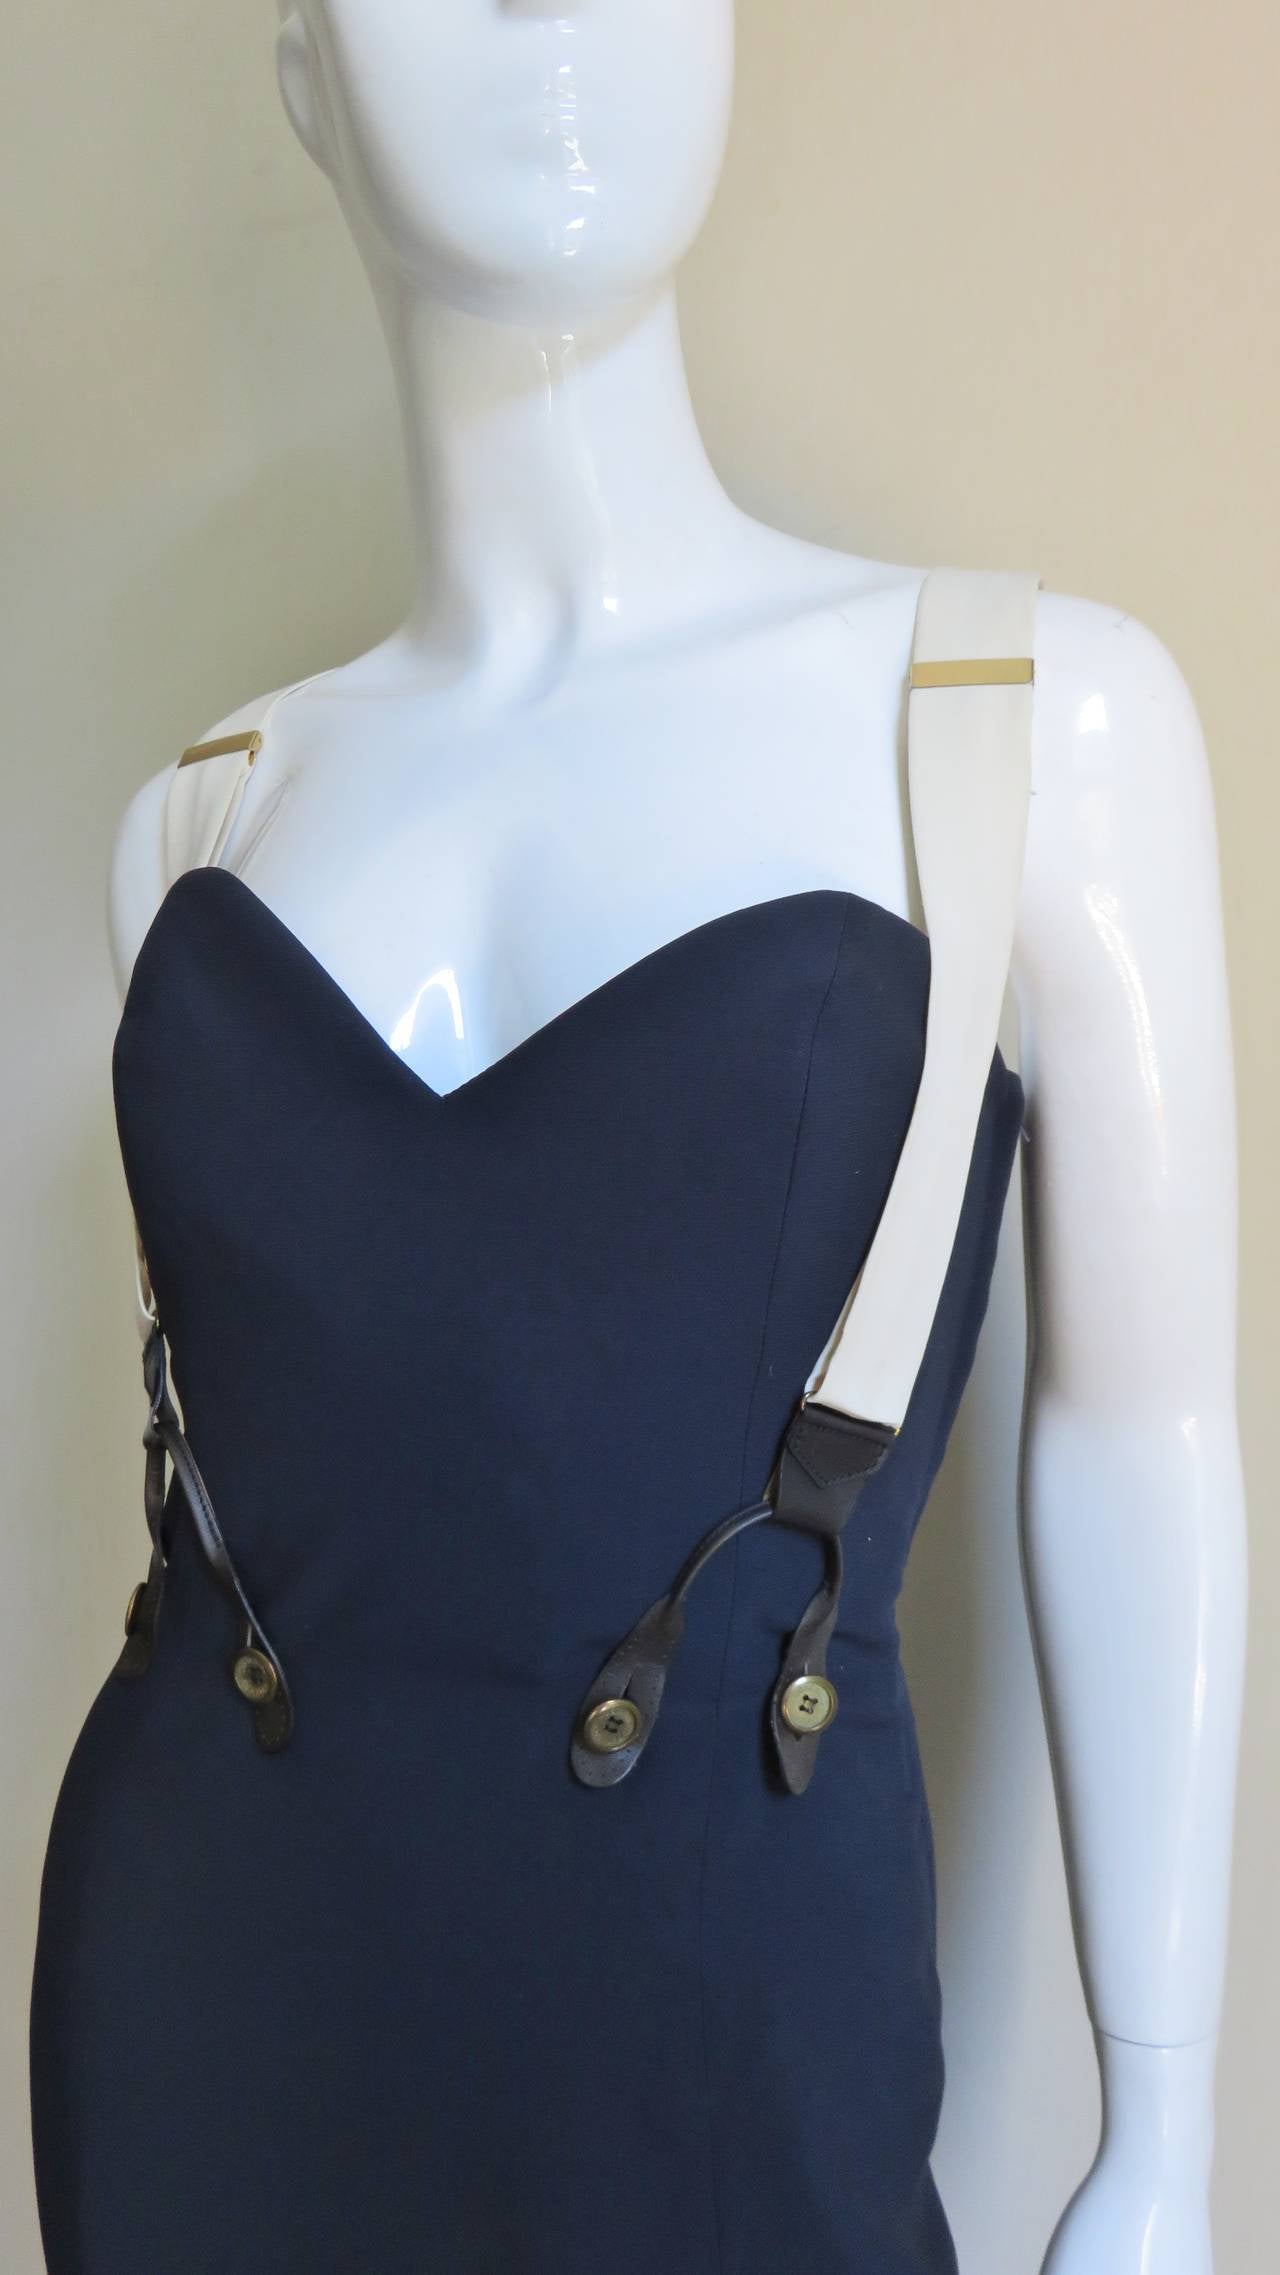 A fabulous dress and jacket set from Moschino Couture in navy and off white.  The fitted boned bustier dress comes with adjustable, detachable suspenders which button onto the waist front and back.  A boxy open off white jacket with faux flap